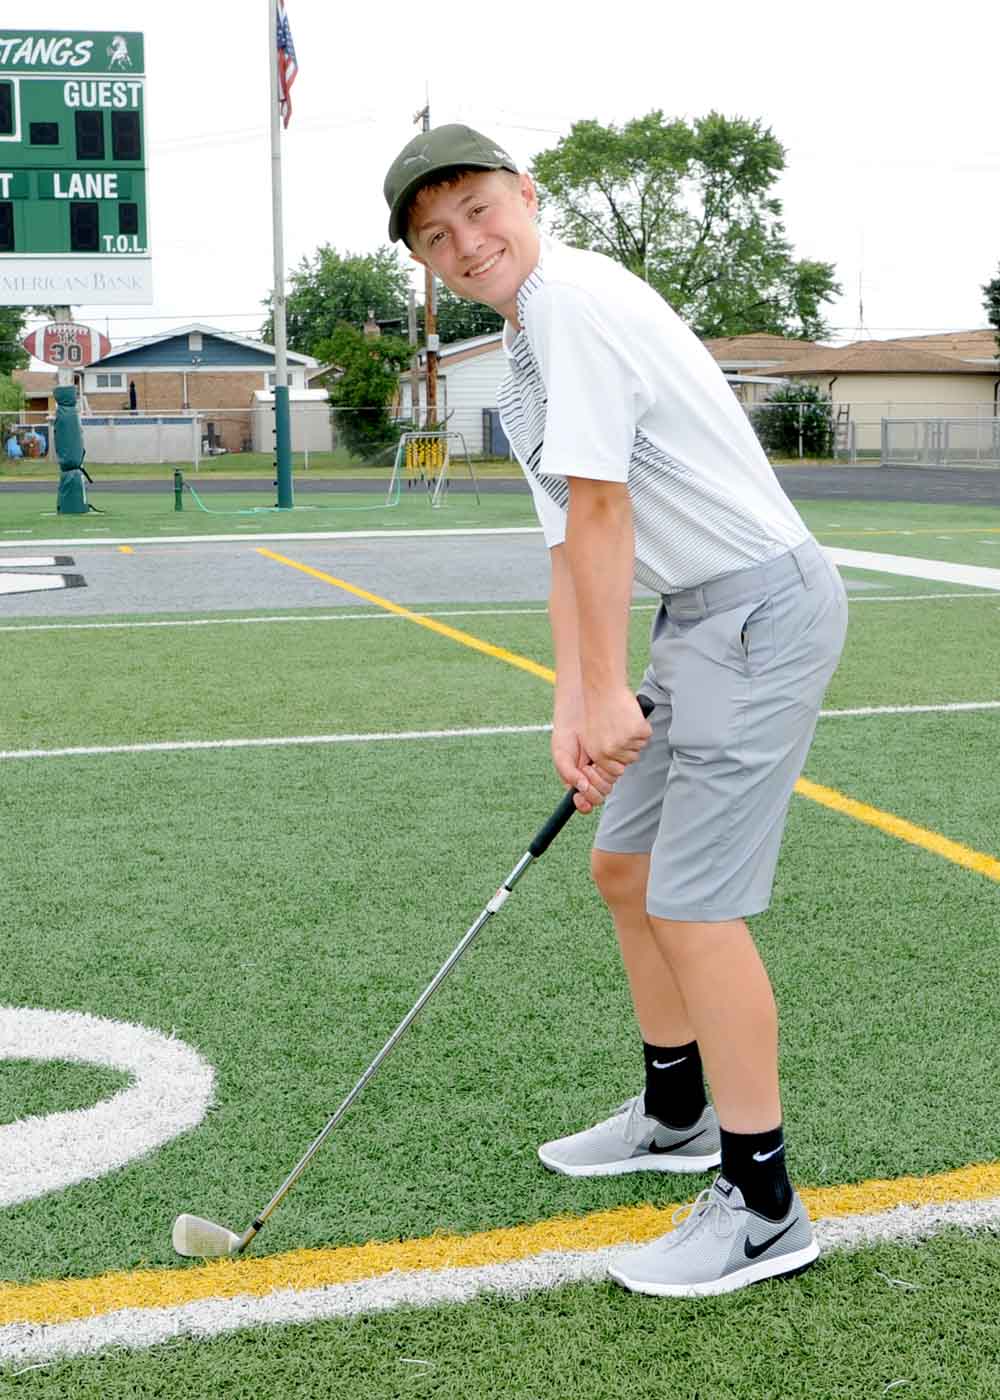 Mustangs Golf player sport by Tom Killoran Photography